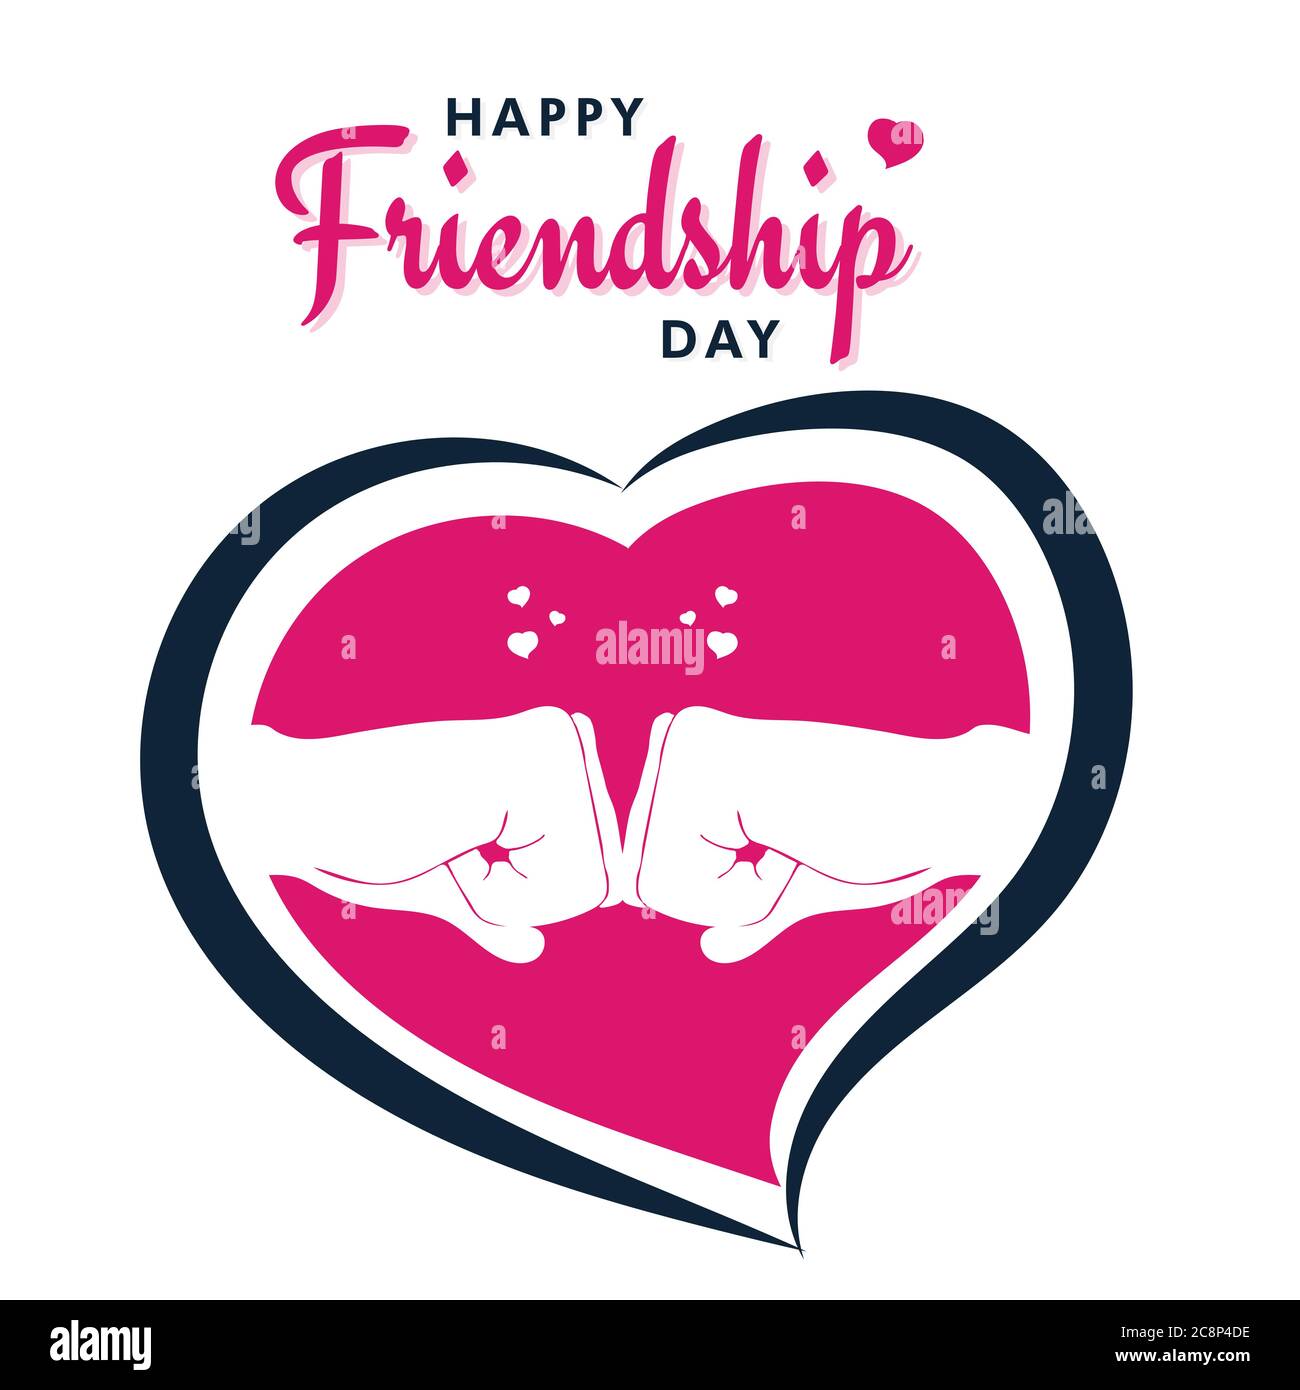 Happy Friendship Day, fist bump with friends flat illustration poster, vector Stock Vector